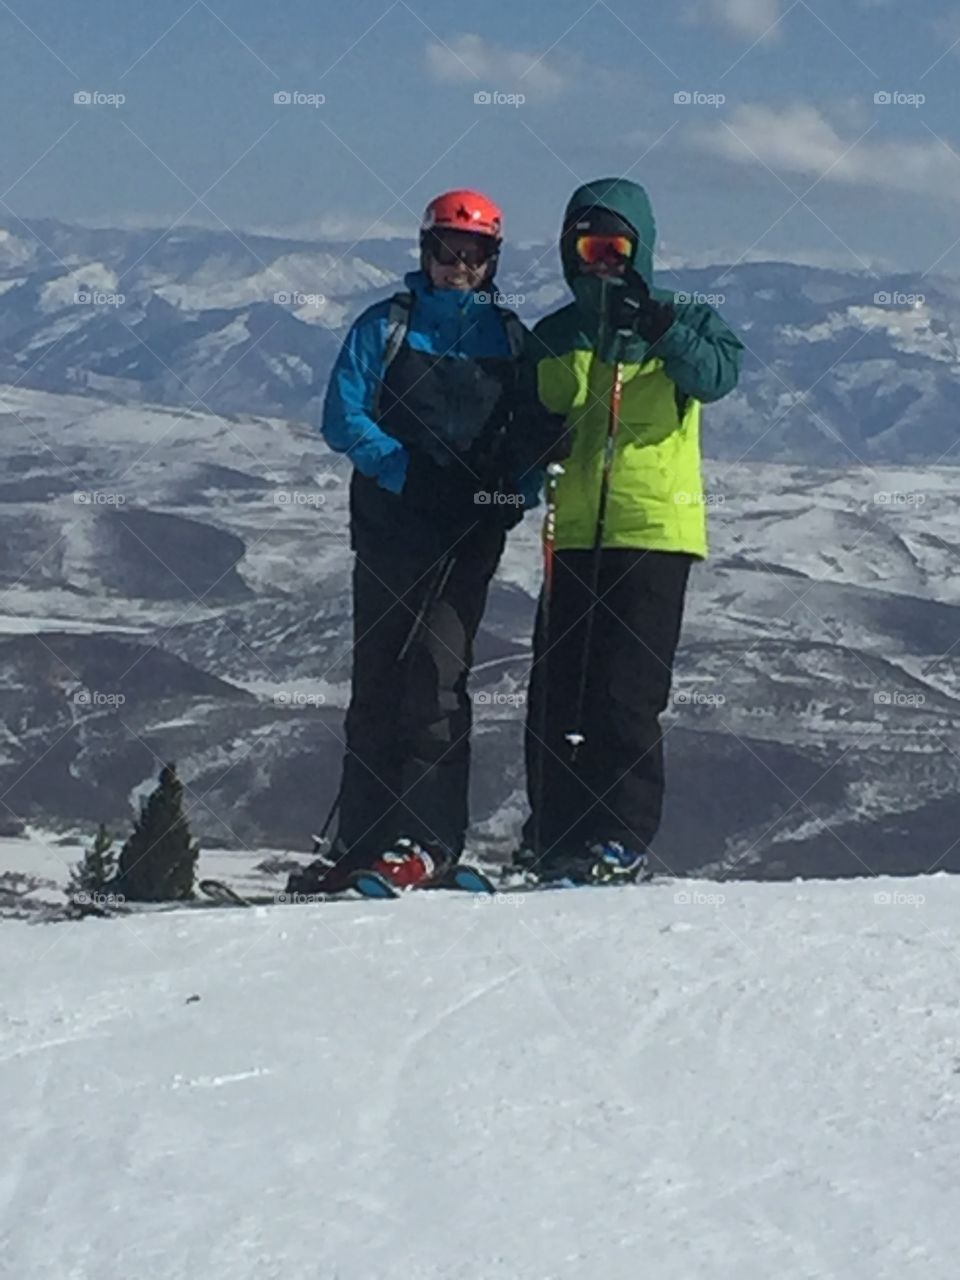 Friends on the slopes